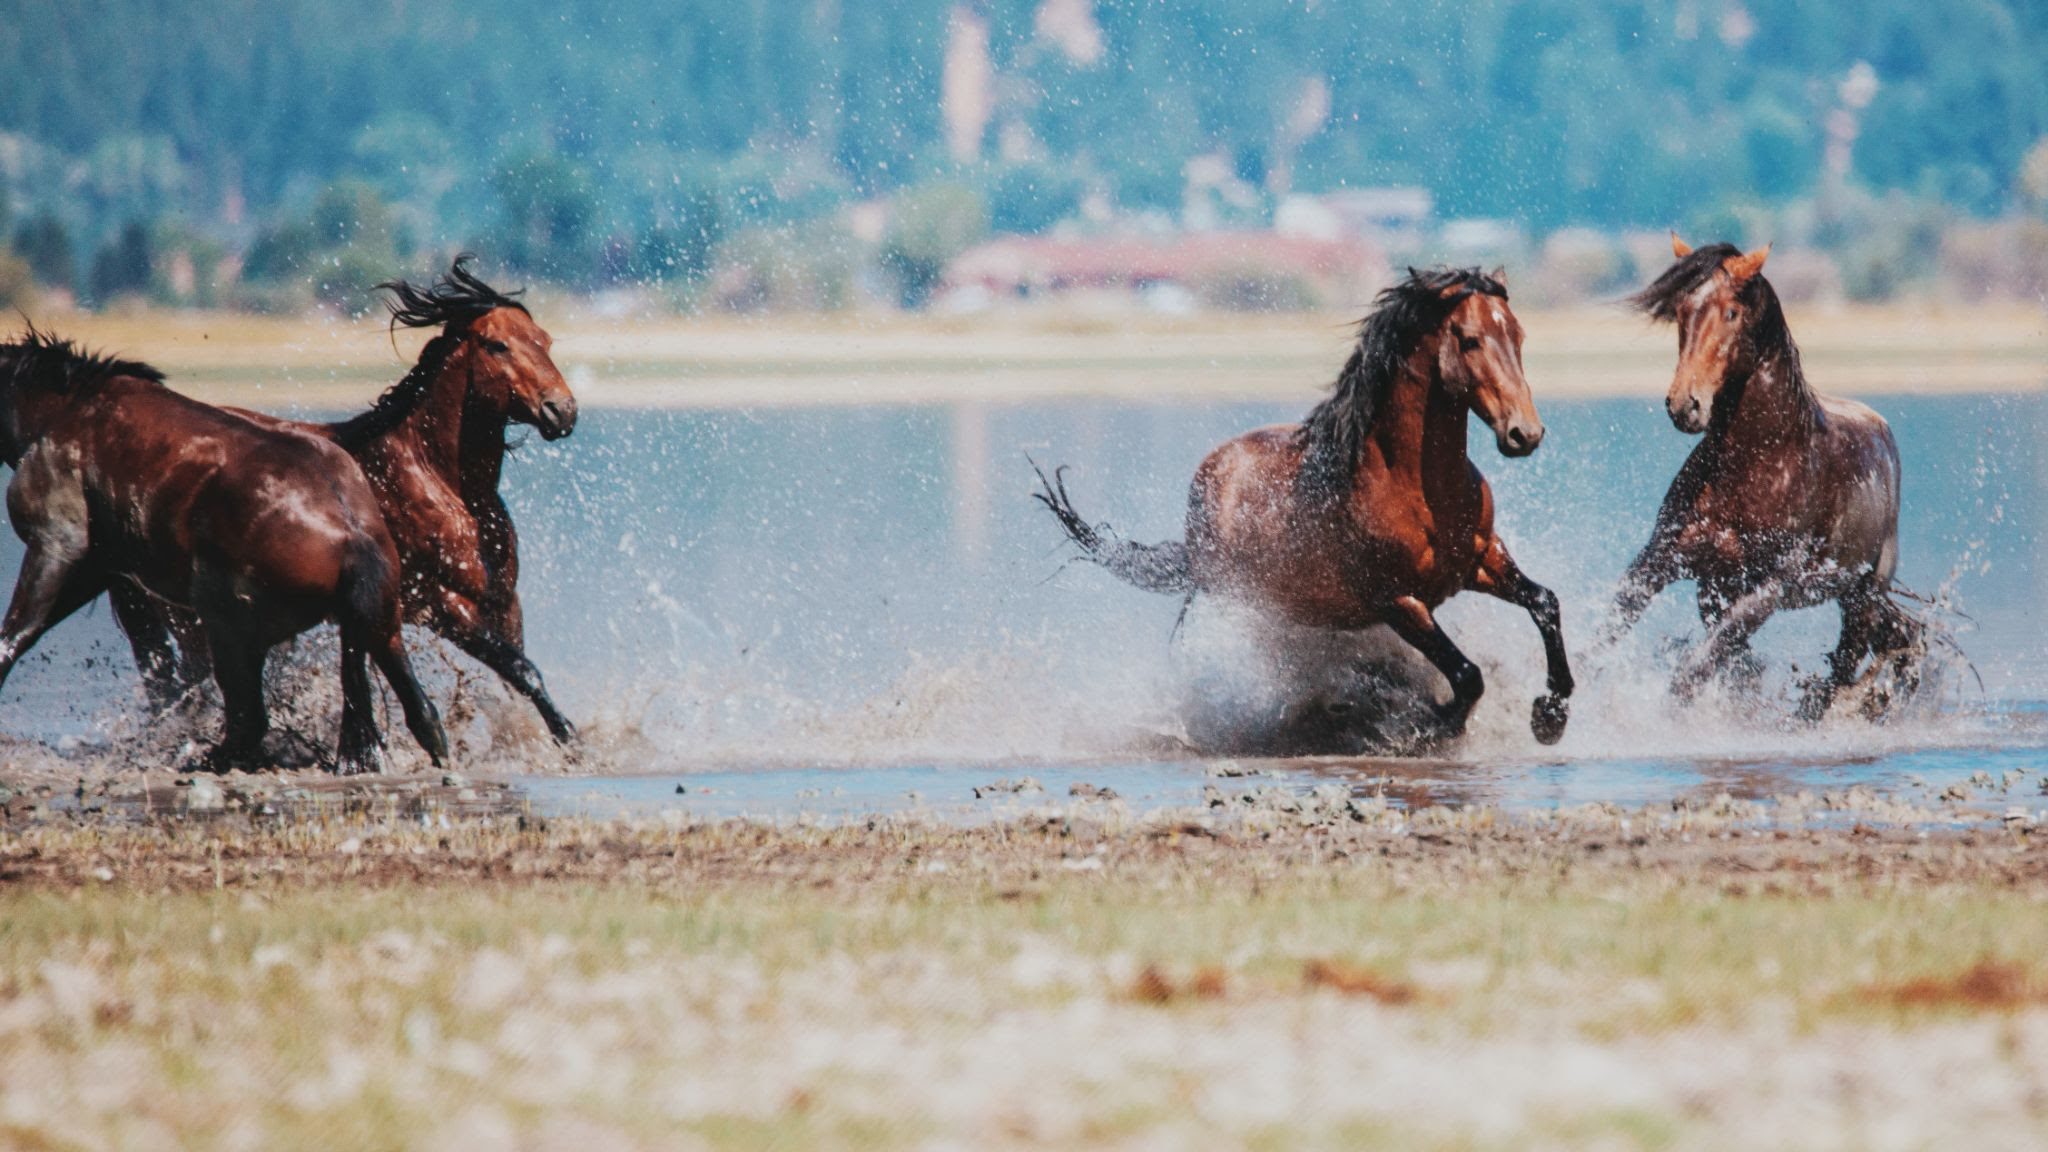 Several mustangs gallop and splash playfully in a puddle